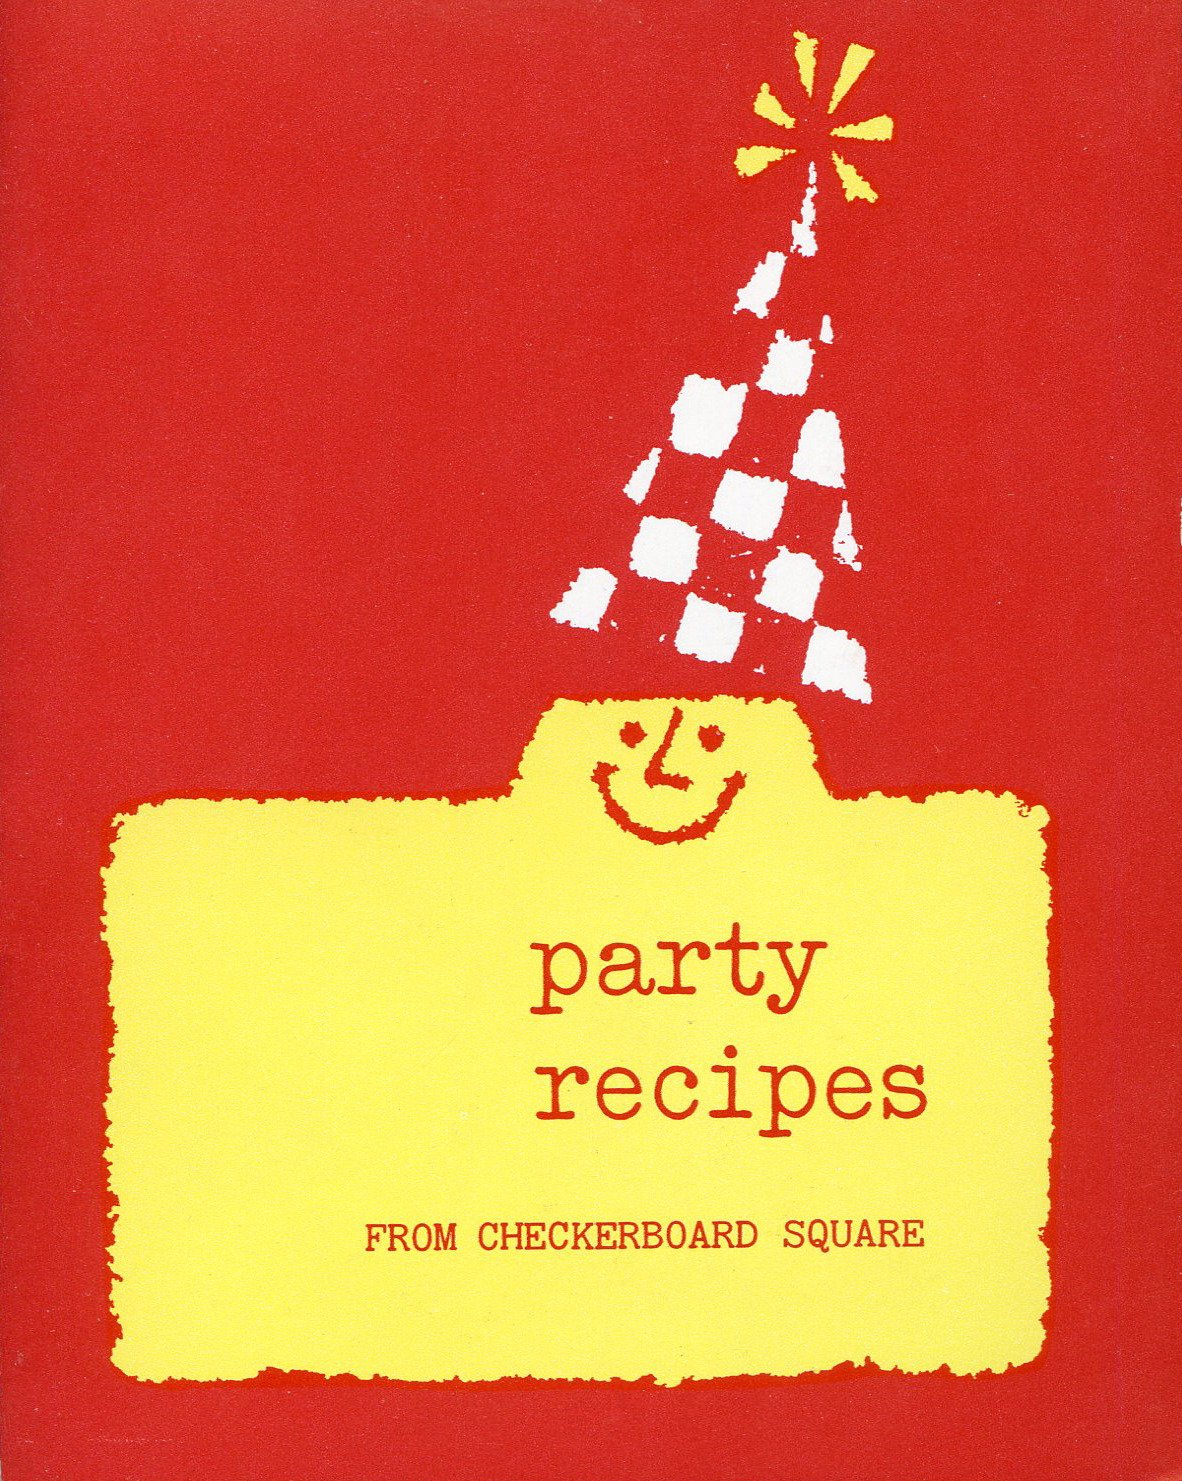 Ralston Purina 'Party Recipes from Checkerboard Square' - 1963